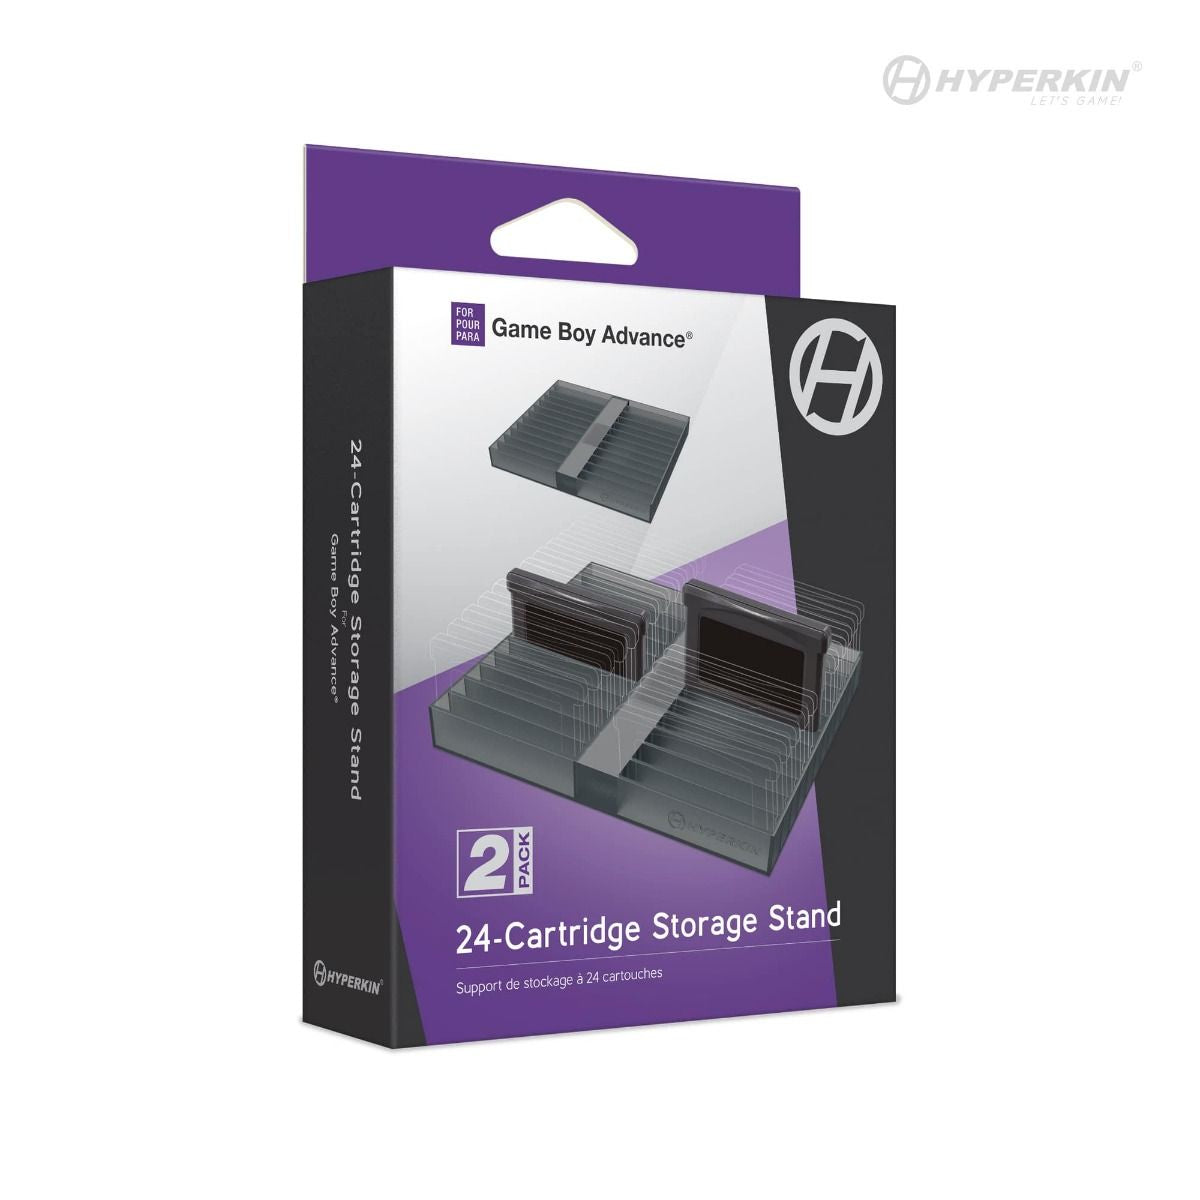 Hyperkin 24-Cartridge Storage Stand for GBA (2 Pack)